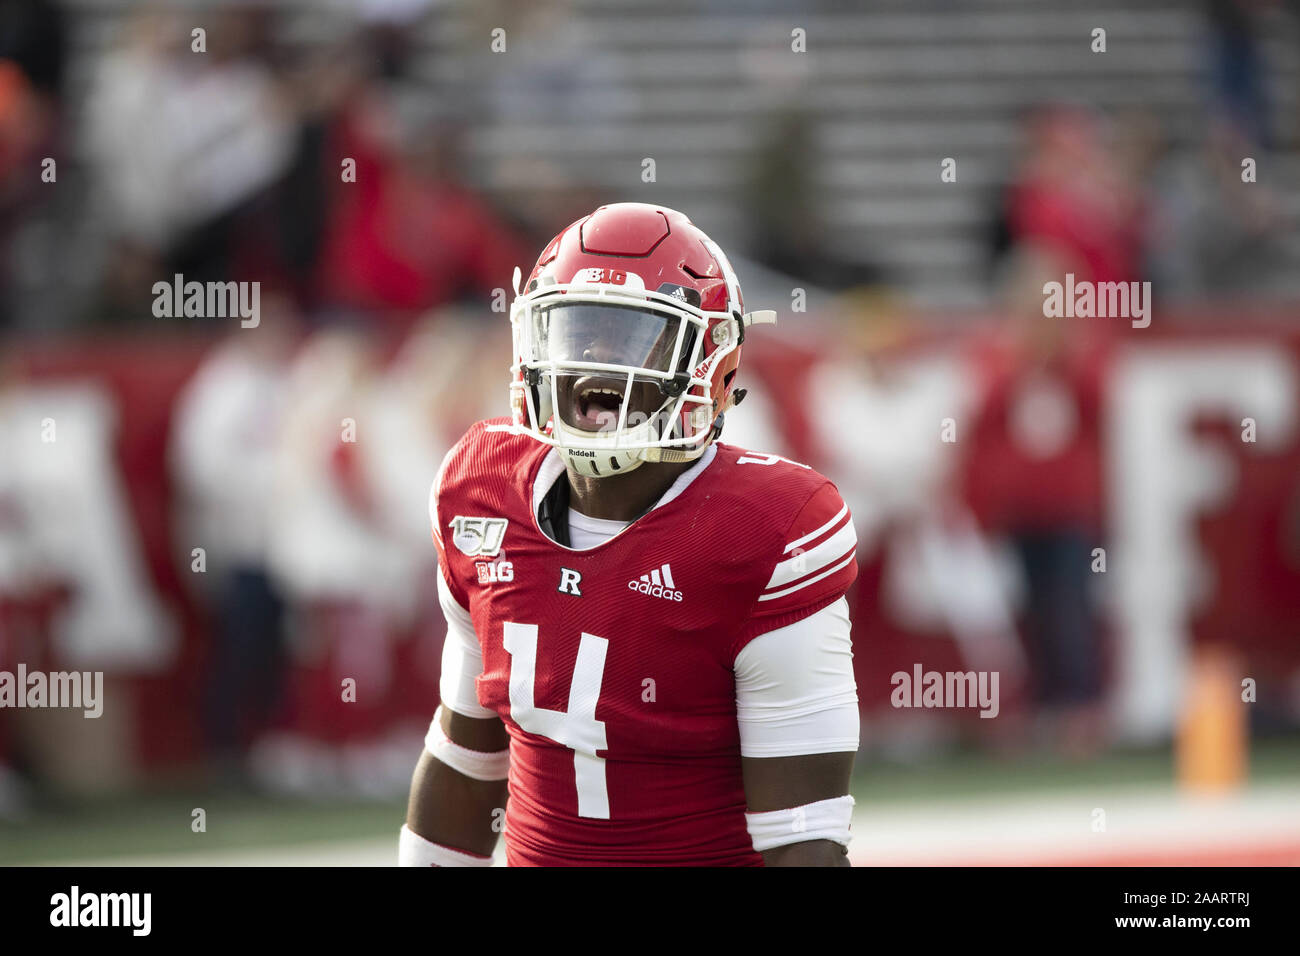 Piscataway, New Jersey, USA. 23rd Nov, 2019. RUTGERS TIM BARROW reacts after a broken play against Michigan State during game action at SHI Stadium in Piscataway, New Jersey. Michigan State shut out Rutgers 27-0 Credit: Brian Branch Price/ZUMA Wire/Alamy Live News Stock Photo